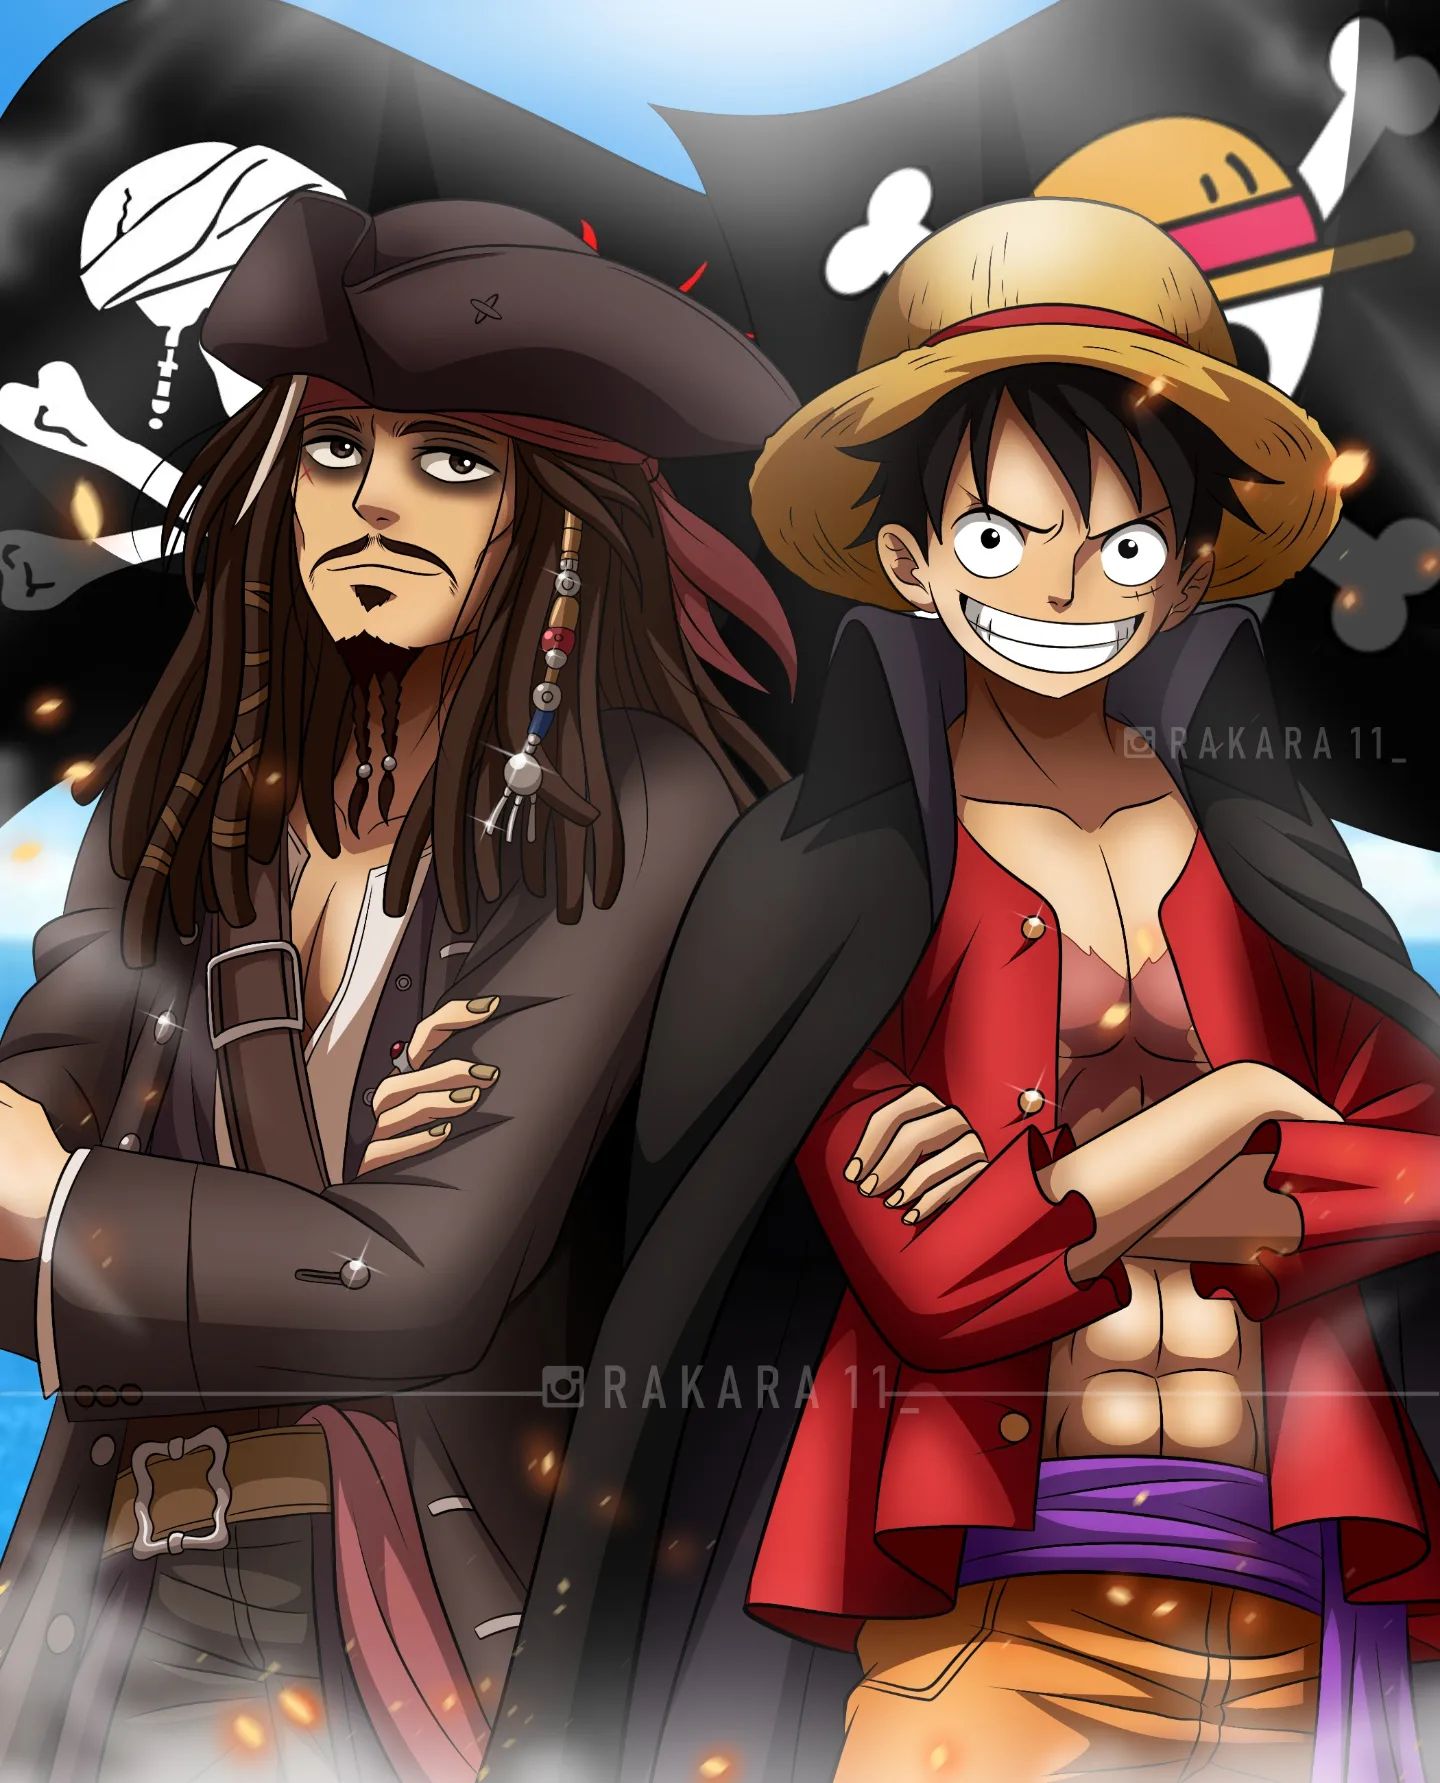 2boys artist_name beard black_hair closed_mouth crossed_arms crossover eyeshadow facial_hair hat highres jack_sparrow jewelry jolly_roger long_hair looking_at_viewer makeup monkey_d._luffy multiple_boys mustache one_piece pirate pirate_costume pirate_hat pirates_of_the_caribbean rakkarts ring scar scar_on_cheek scar_on_face short_hair smile straw_hat